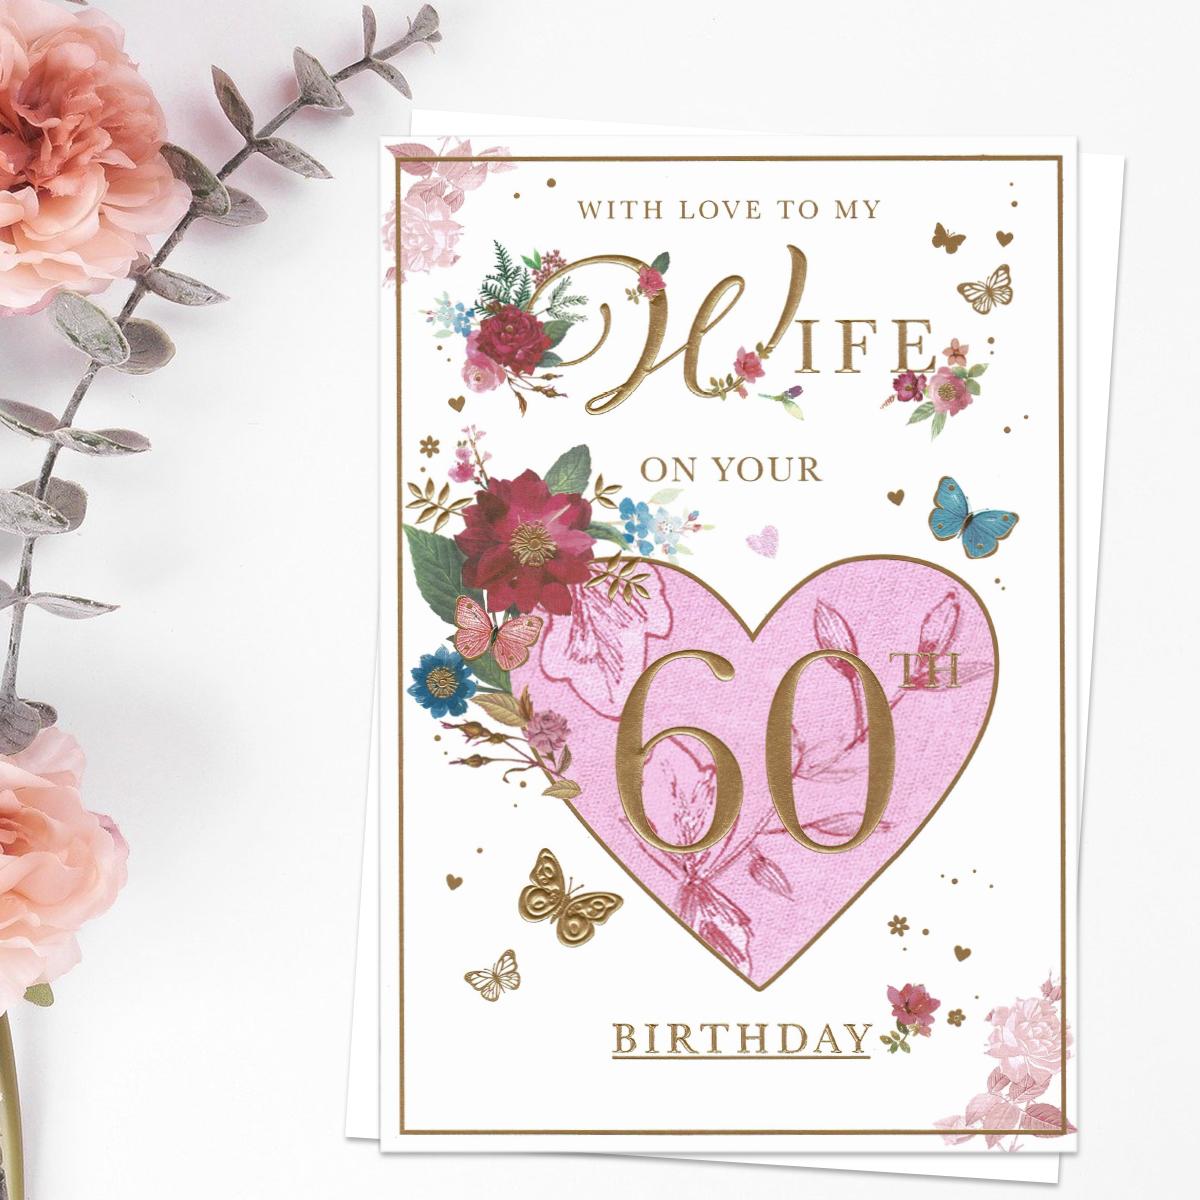 Wife On Your 60th Birthday Floral Heart Card Front Image